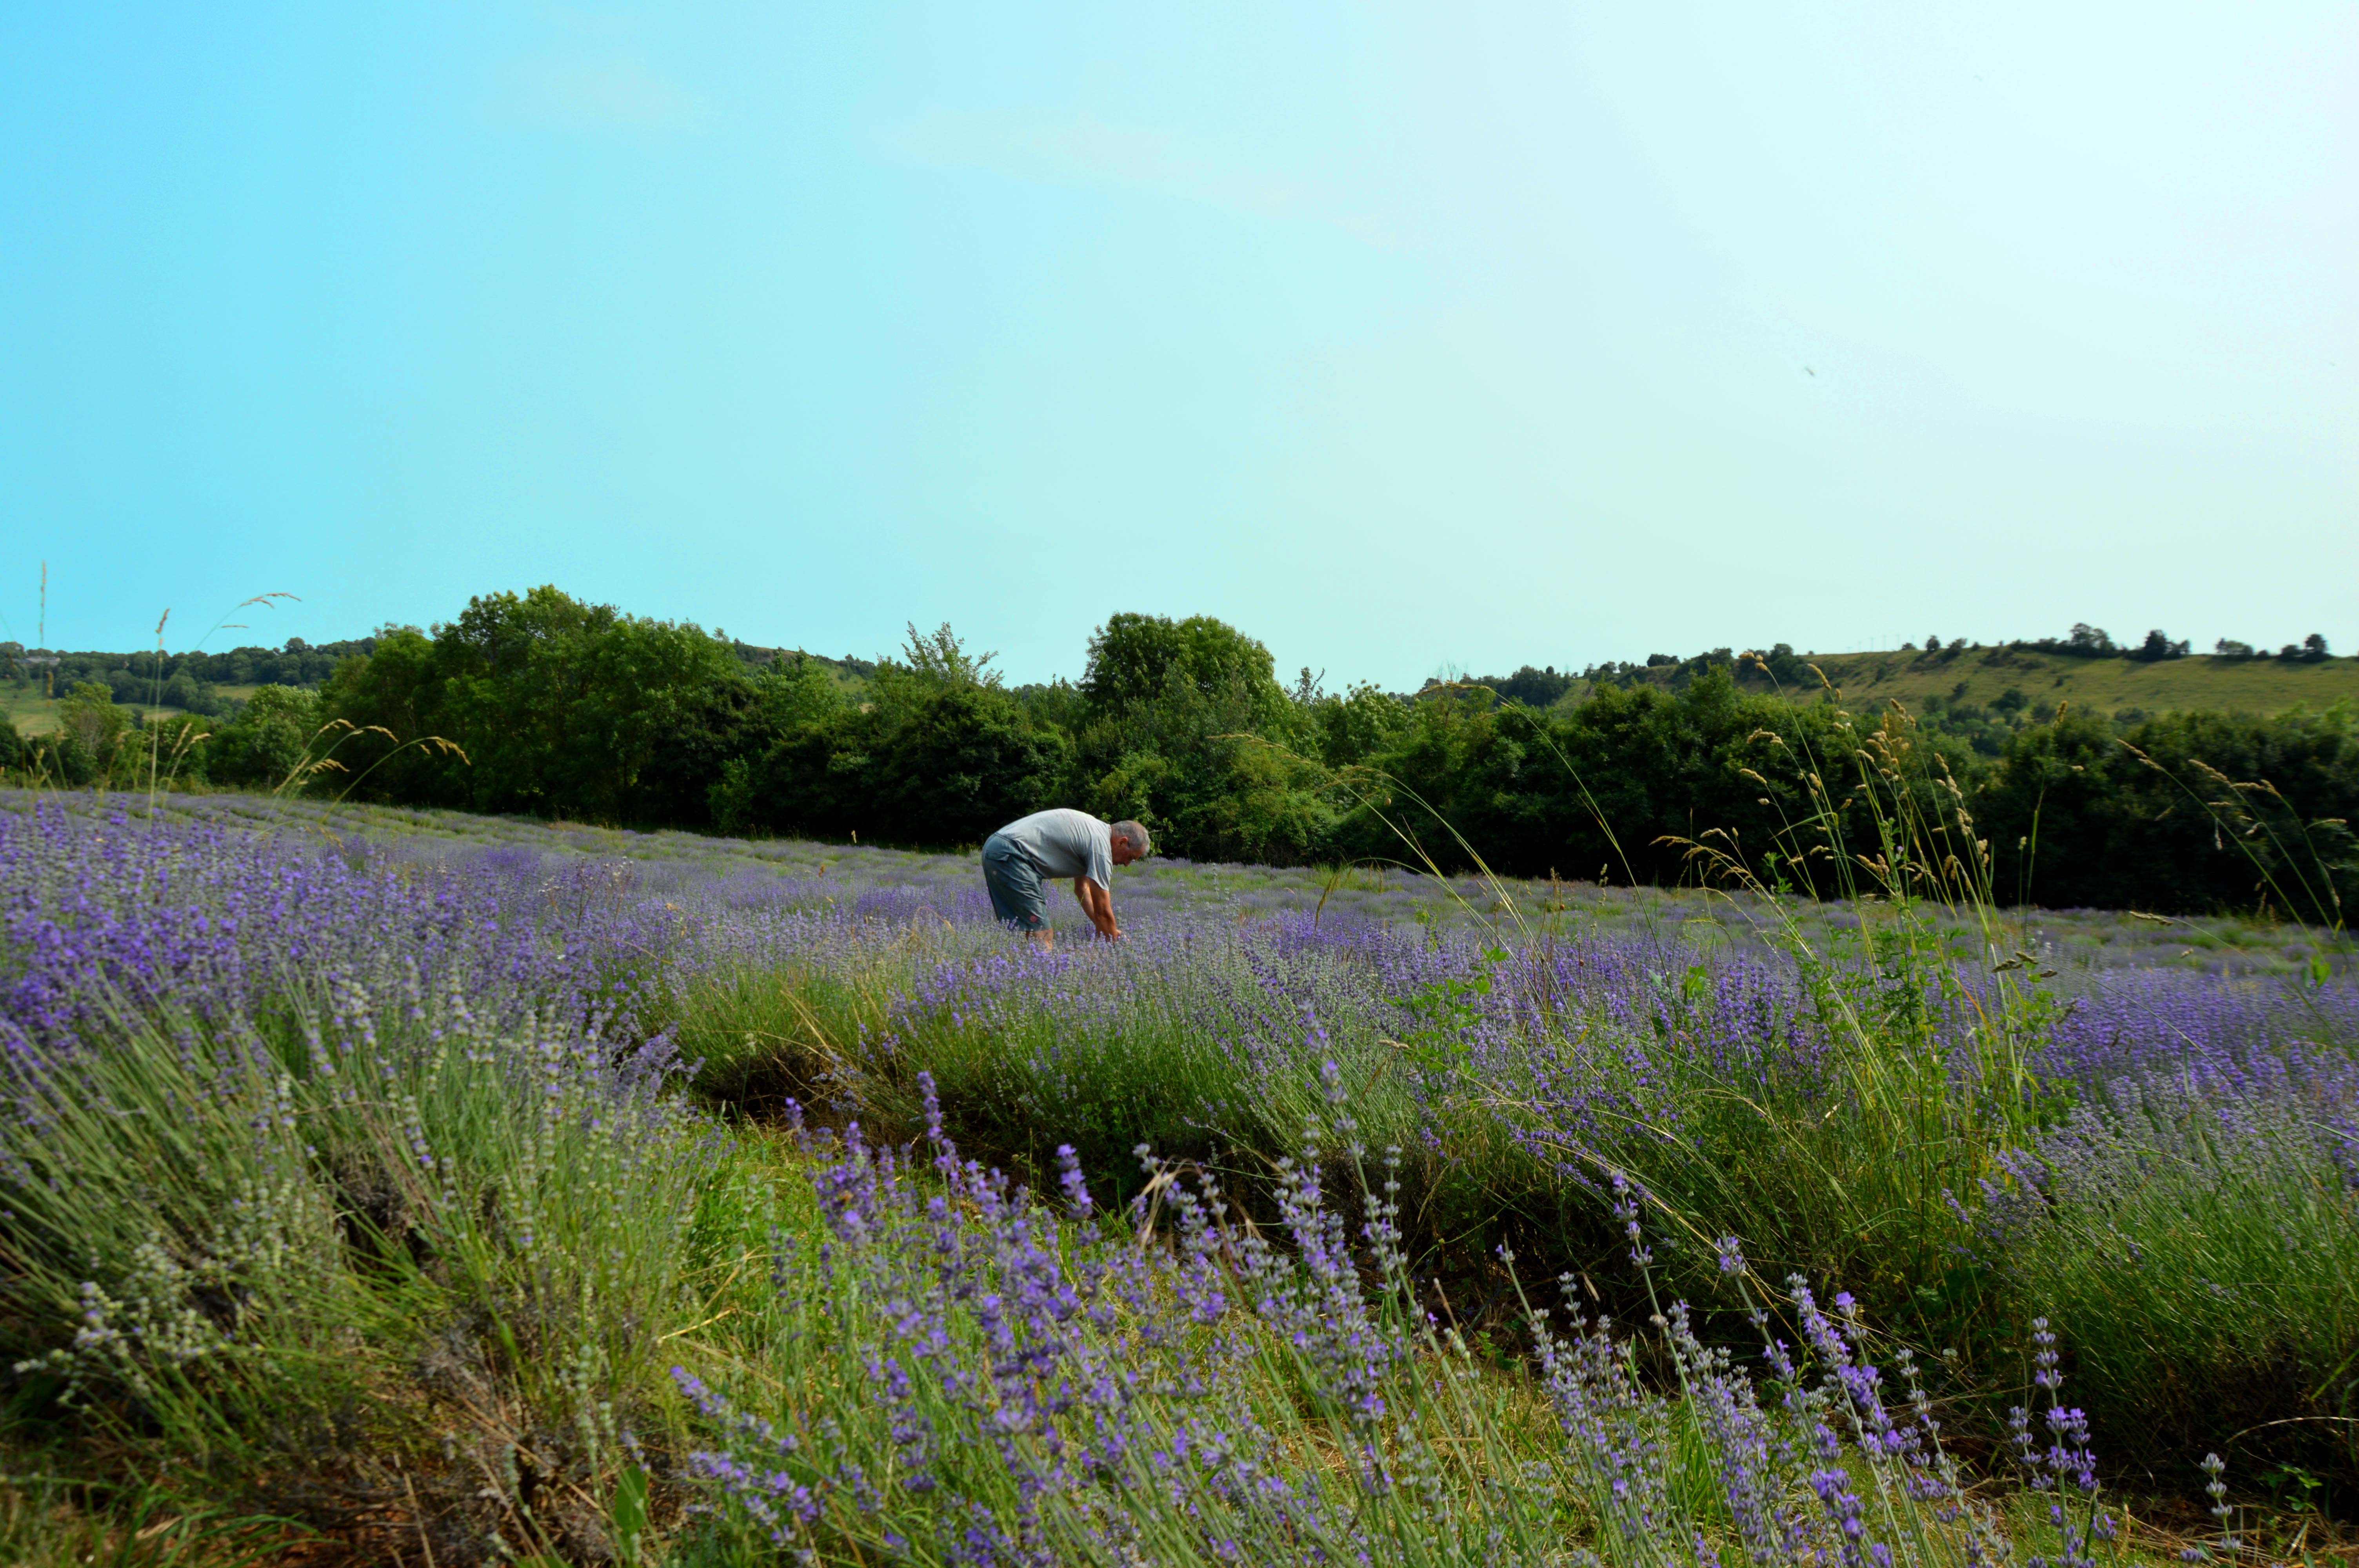 A lavender grower working in his field